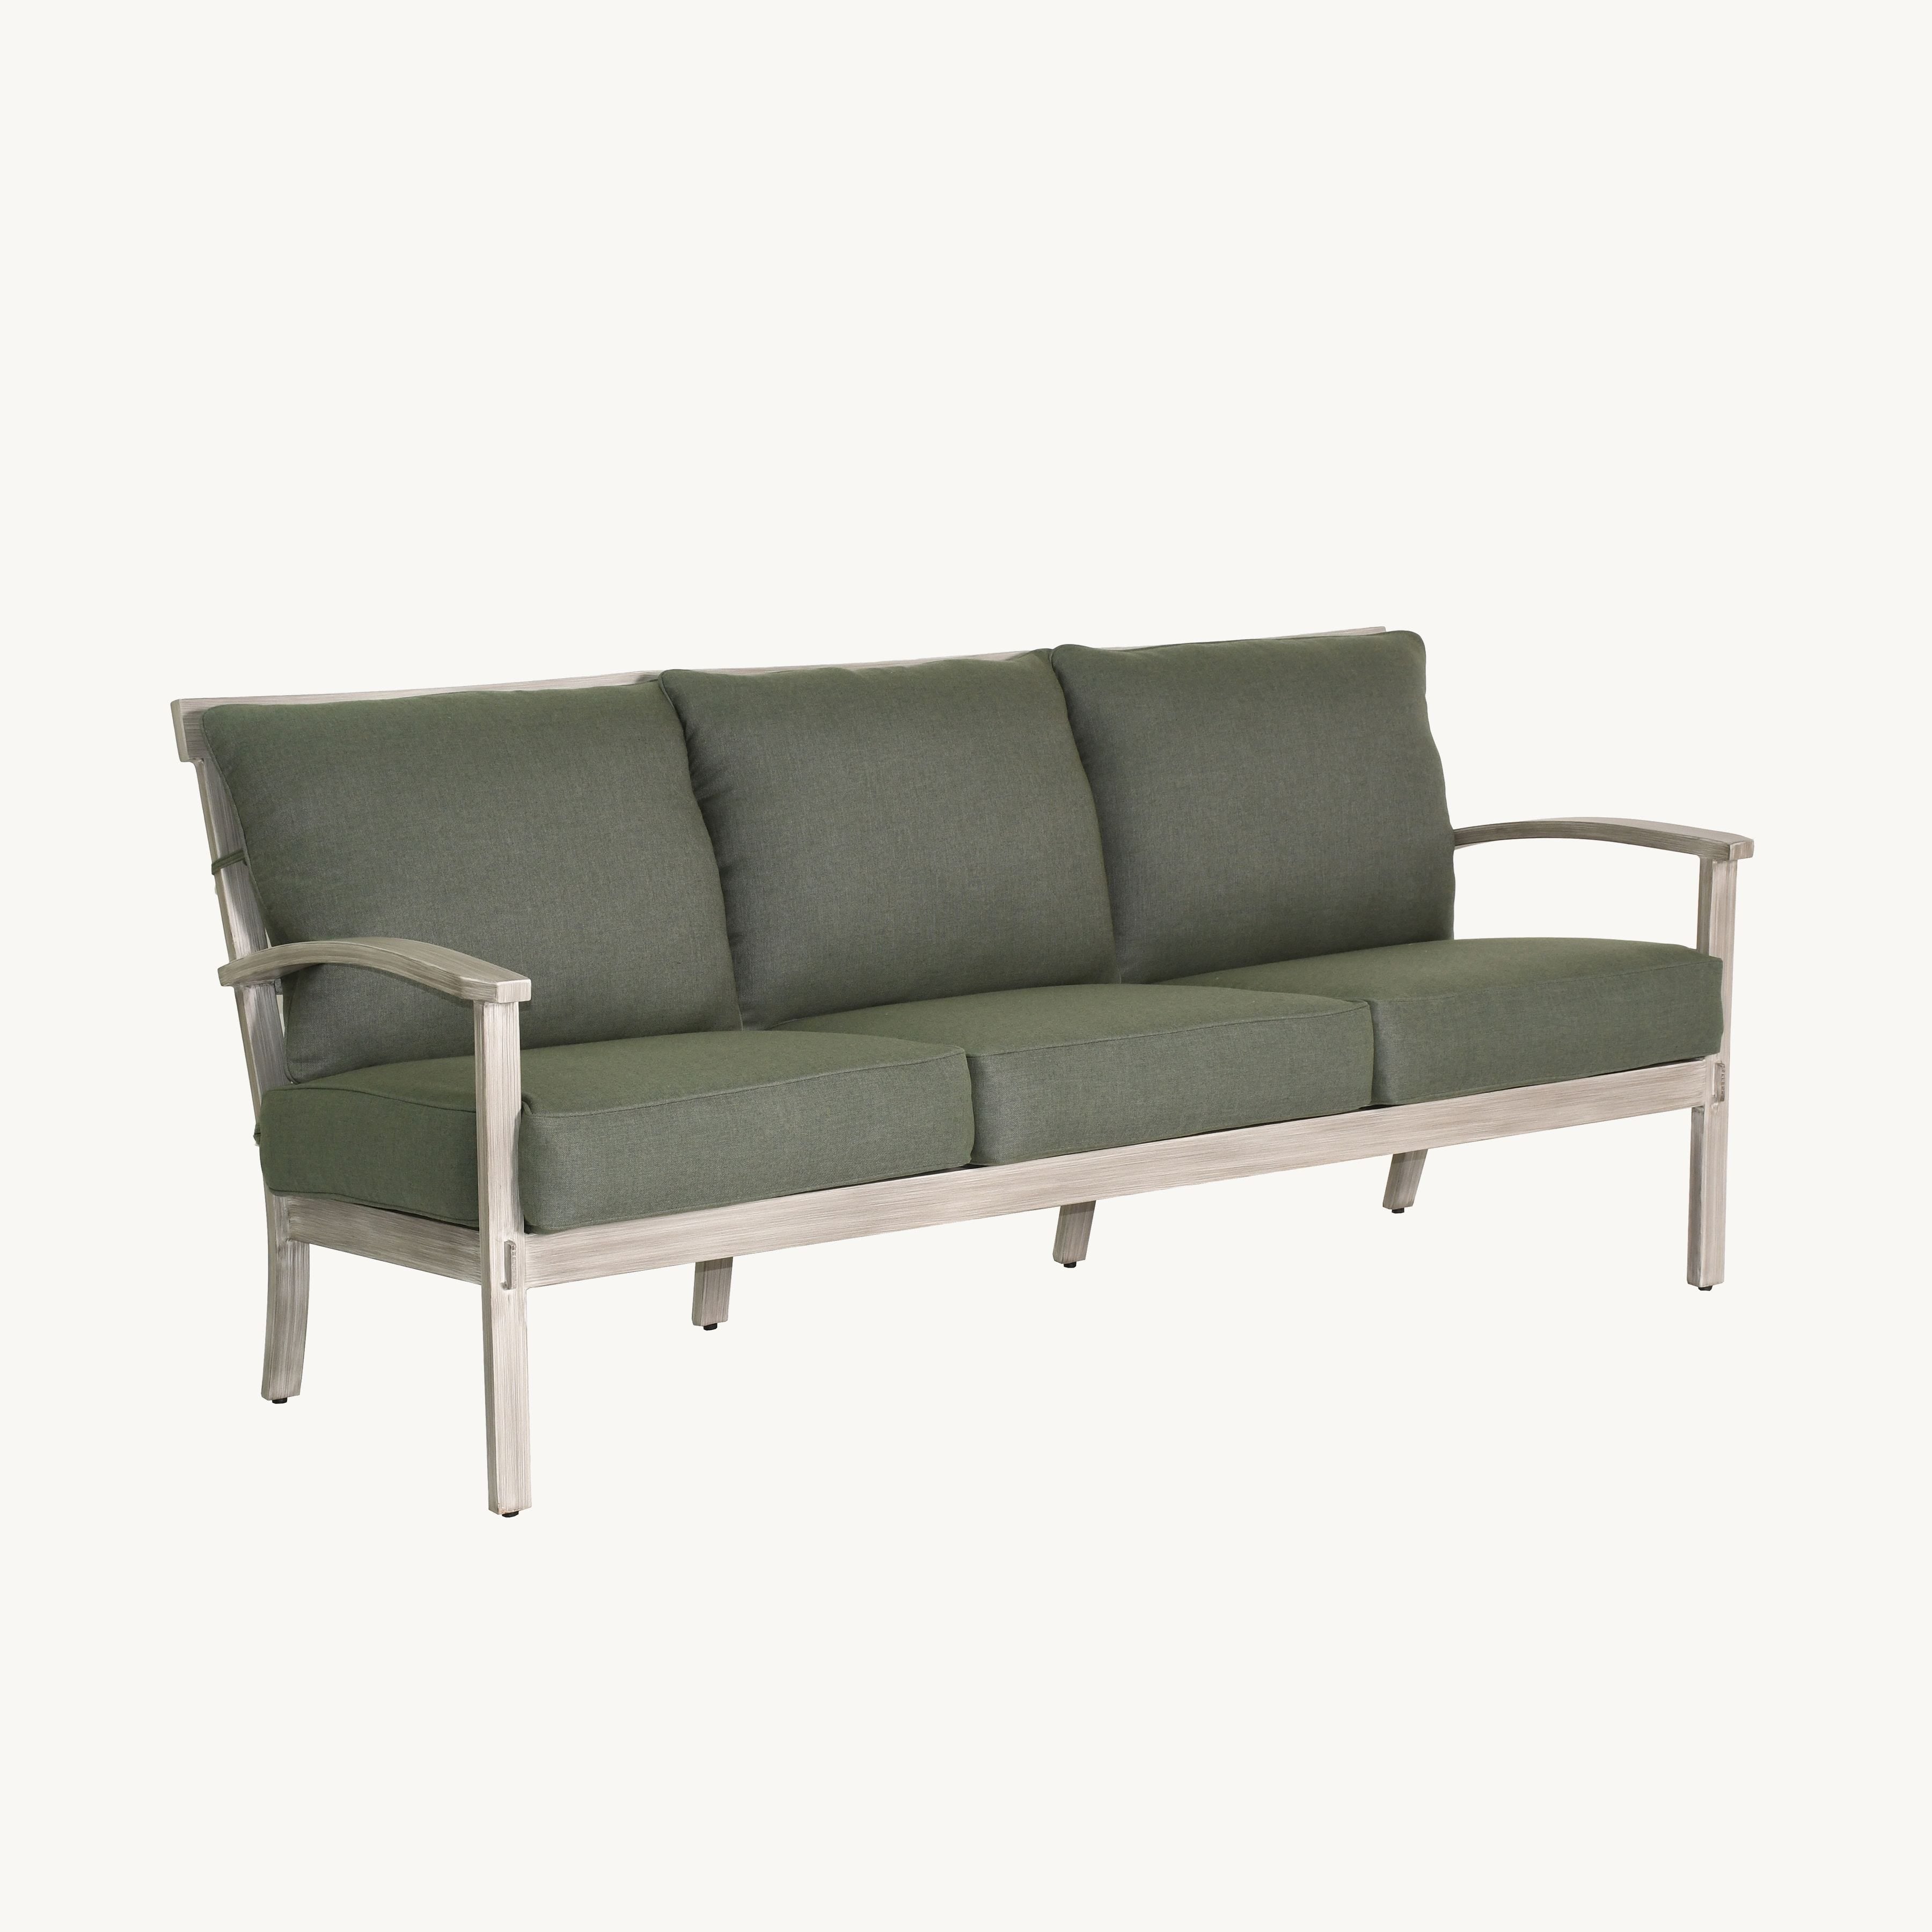 Antler Hill Cushioned Sofa By Castelle